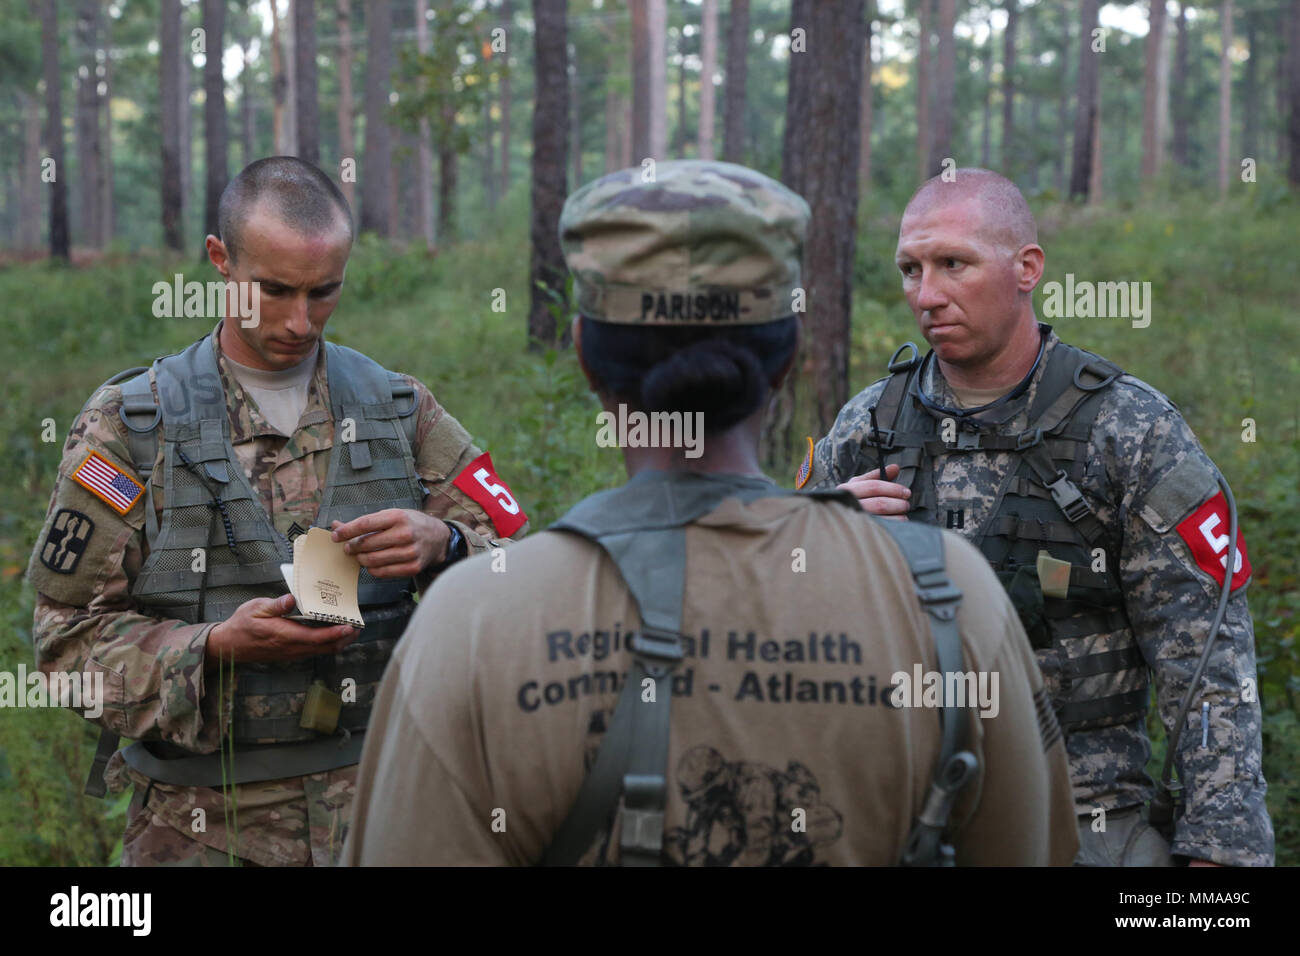 U.S. Army Staff Sgt. Joseph Karslo and Capt. Jeremy Lewis, assigned to the Public Health Command - Atlantic, listen to instructions during the 2017 Best Medic Competition at Fort Bragg, N.C., Sept. 19, 2017. The competition tested the physical and mental toughness, as well as the technical competence, of each medic to identify the team moving forward to represent the region at the next level of the competition.  (U.S. Army photo by Pfc. Meleesa Gutierrez) Stock Photo